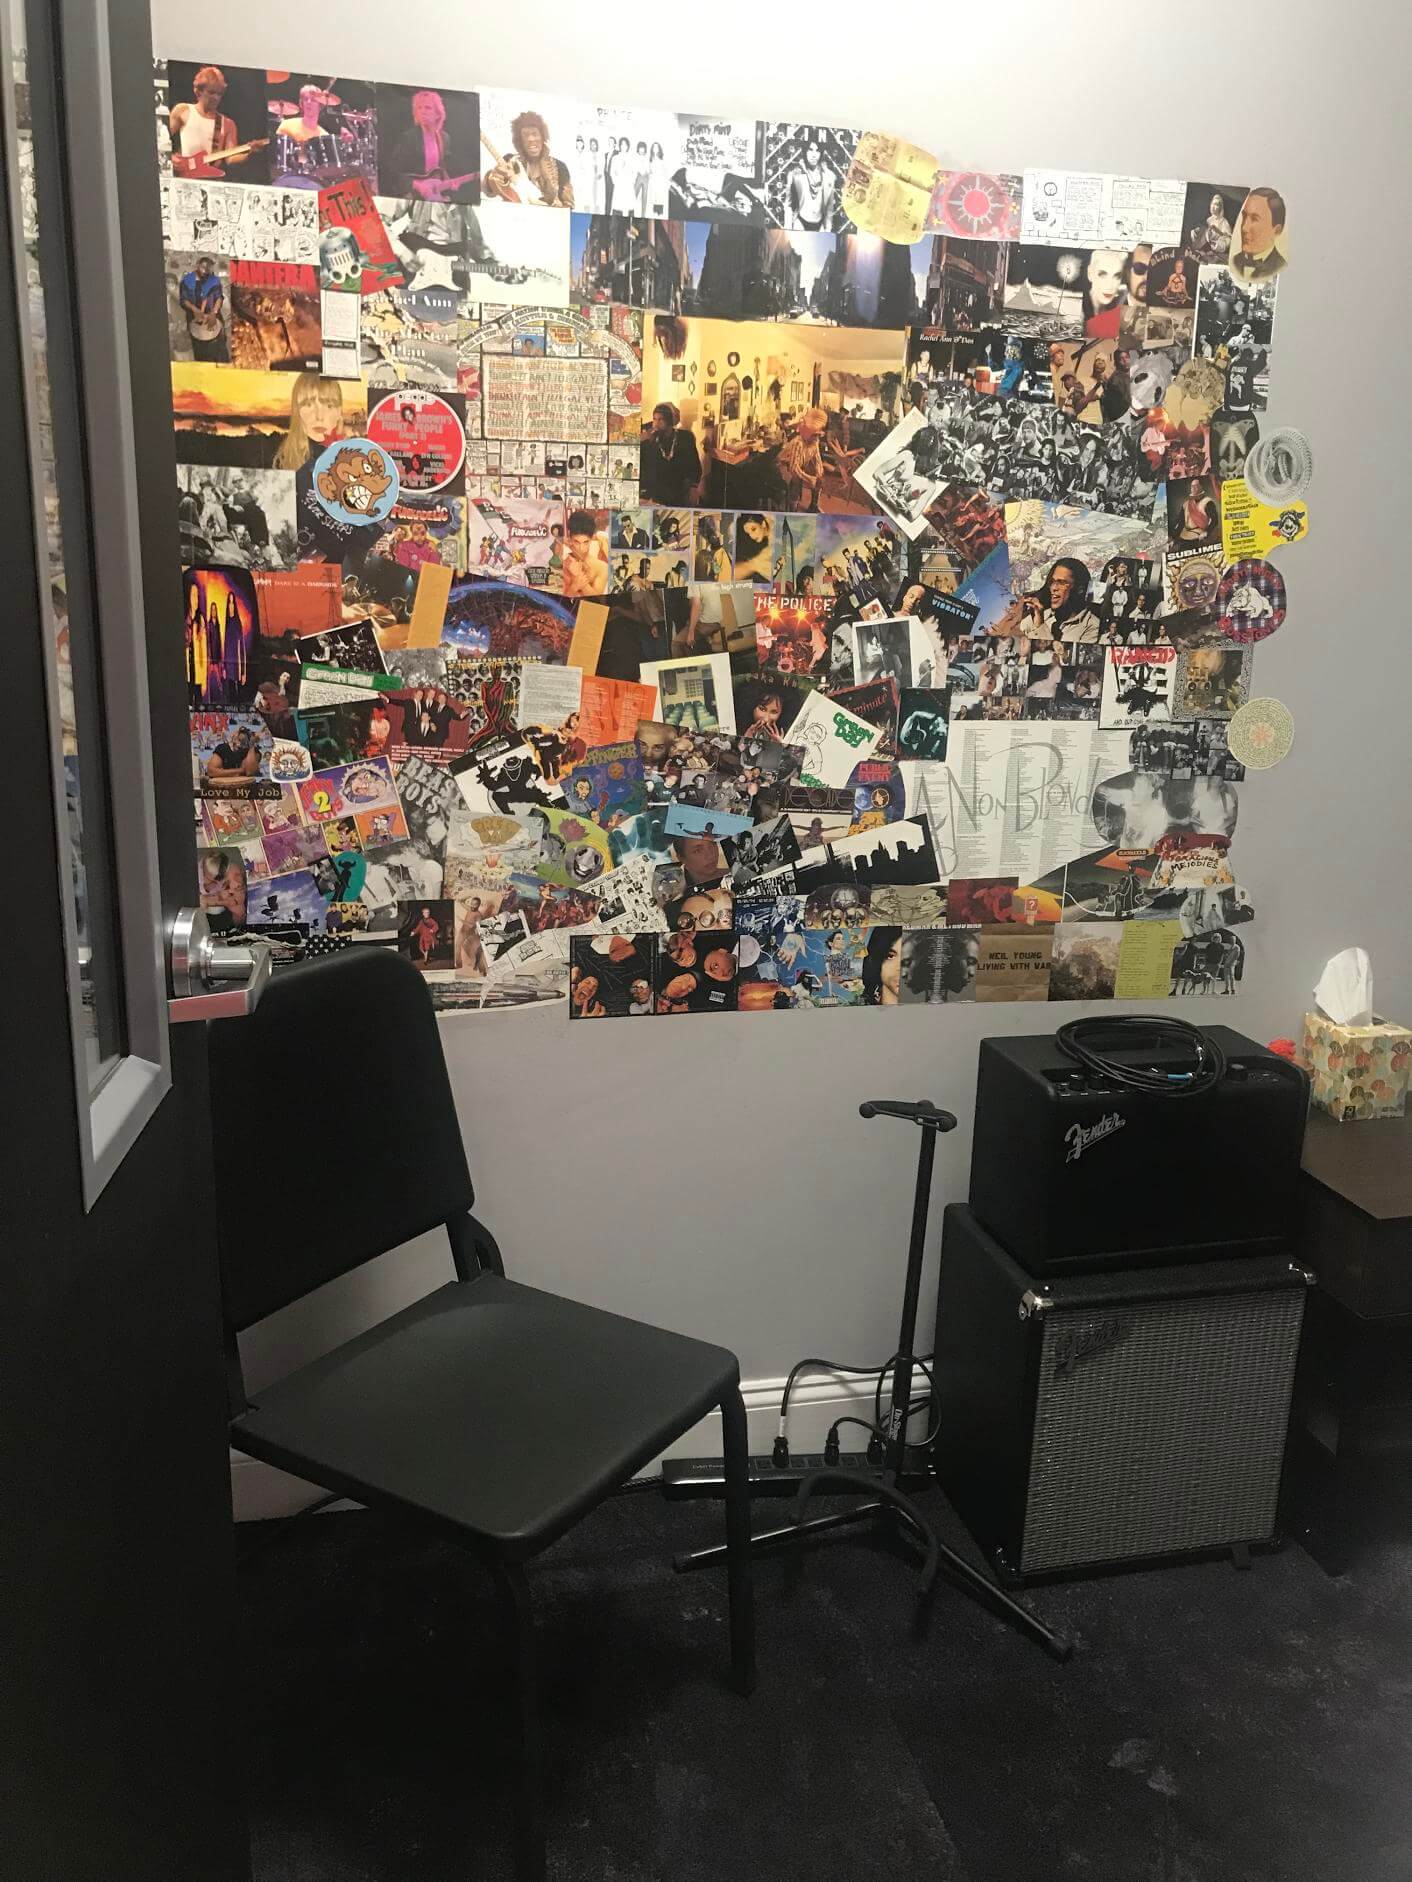 Our 1990s music room is one of our favorites.